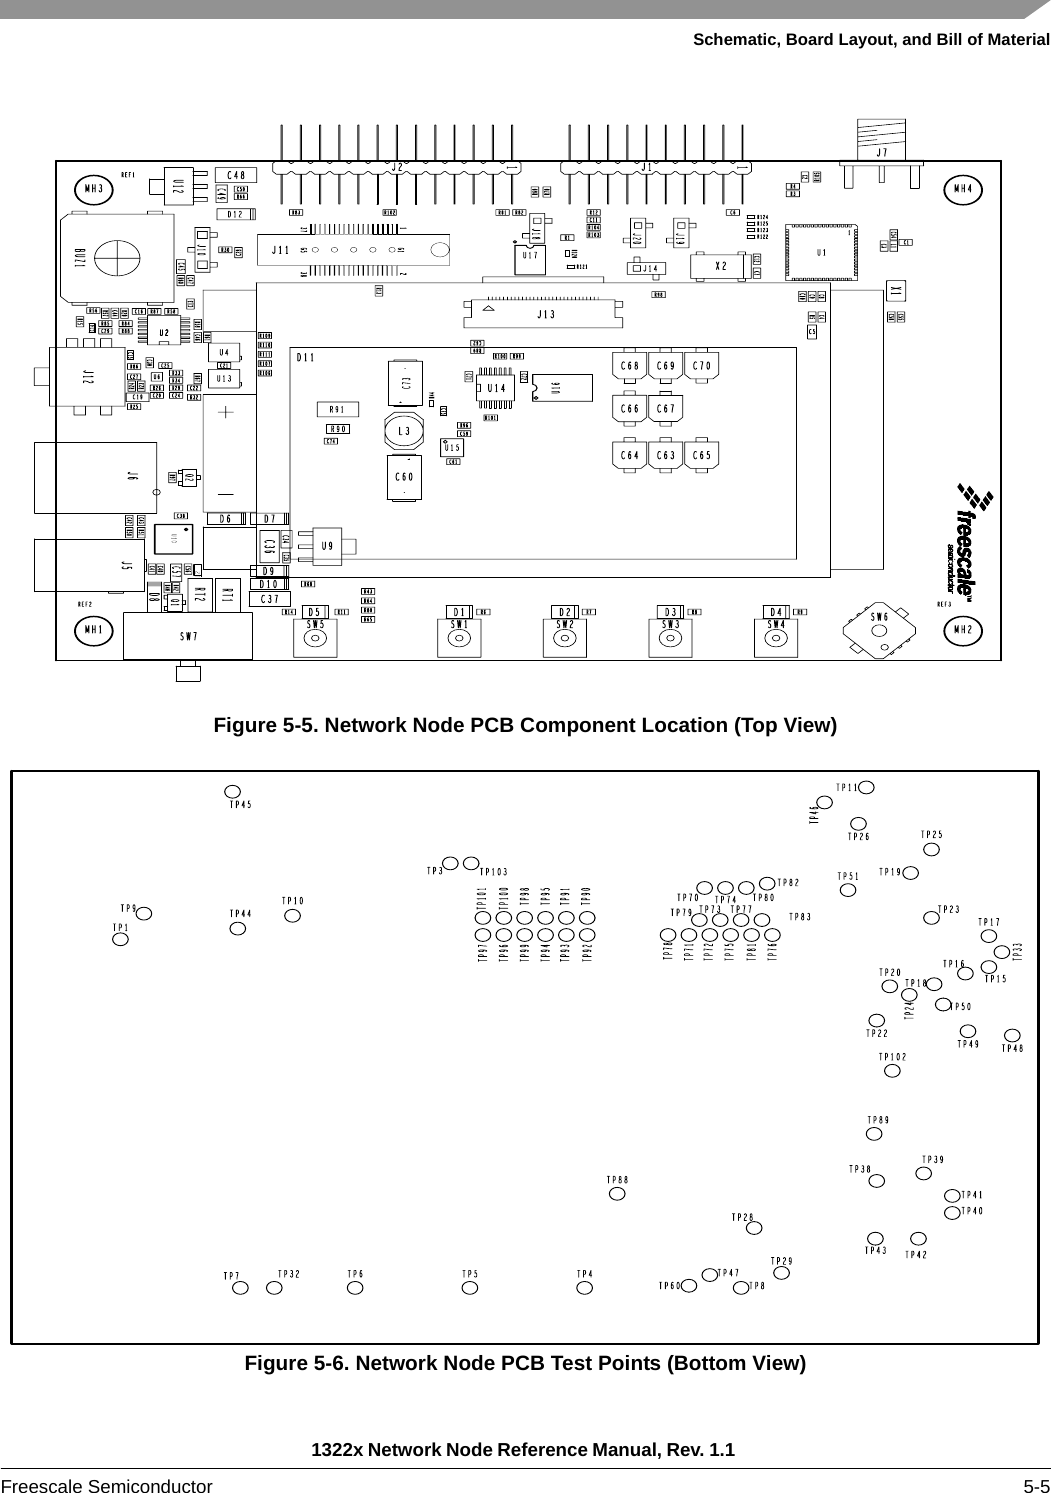 Schematic, Board Layout, and Bill of Material1322x Network Node Reference Manual, Rev. 1.1 Freescale Semiconductor 5-5Figure 5-5. Network Node PCB Component Location (Top View)Figure 5-6. Network Node PCB Test Points (Bottom View)